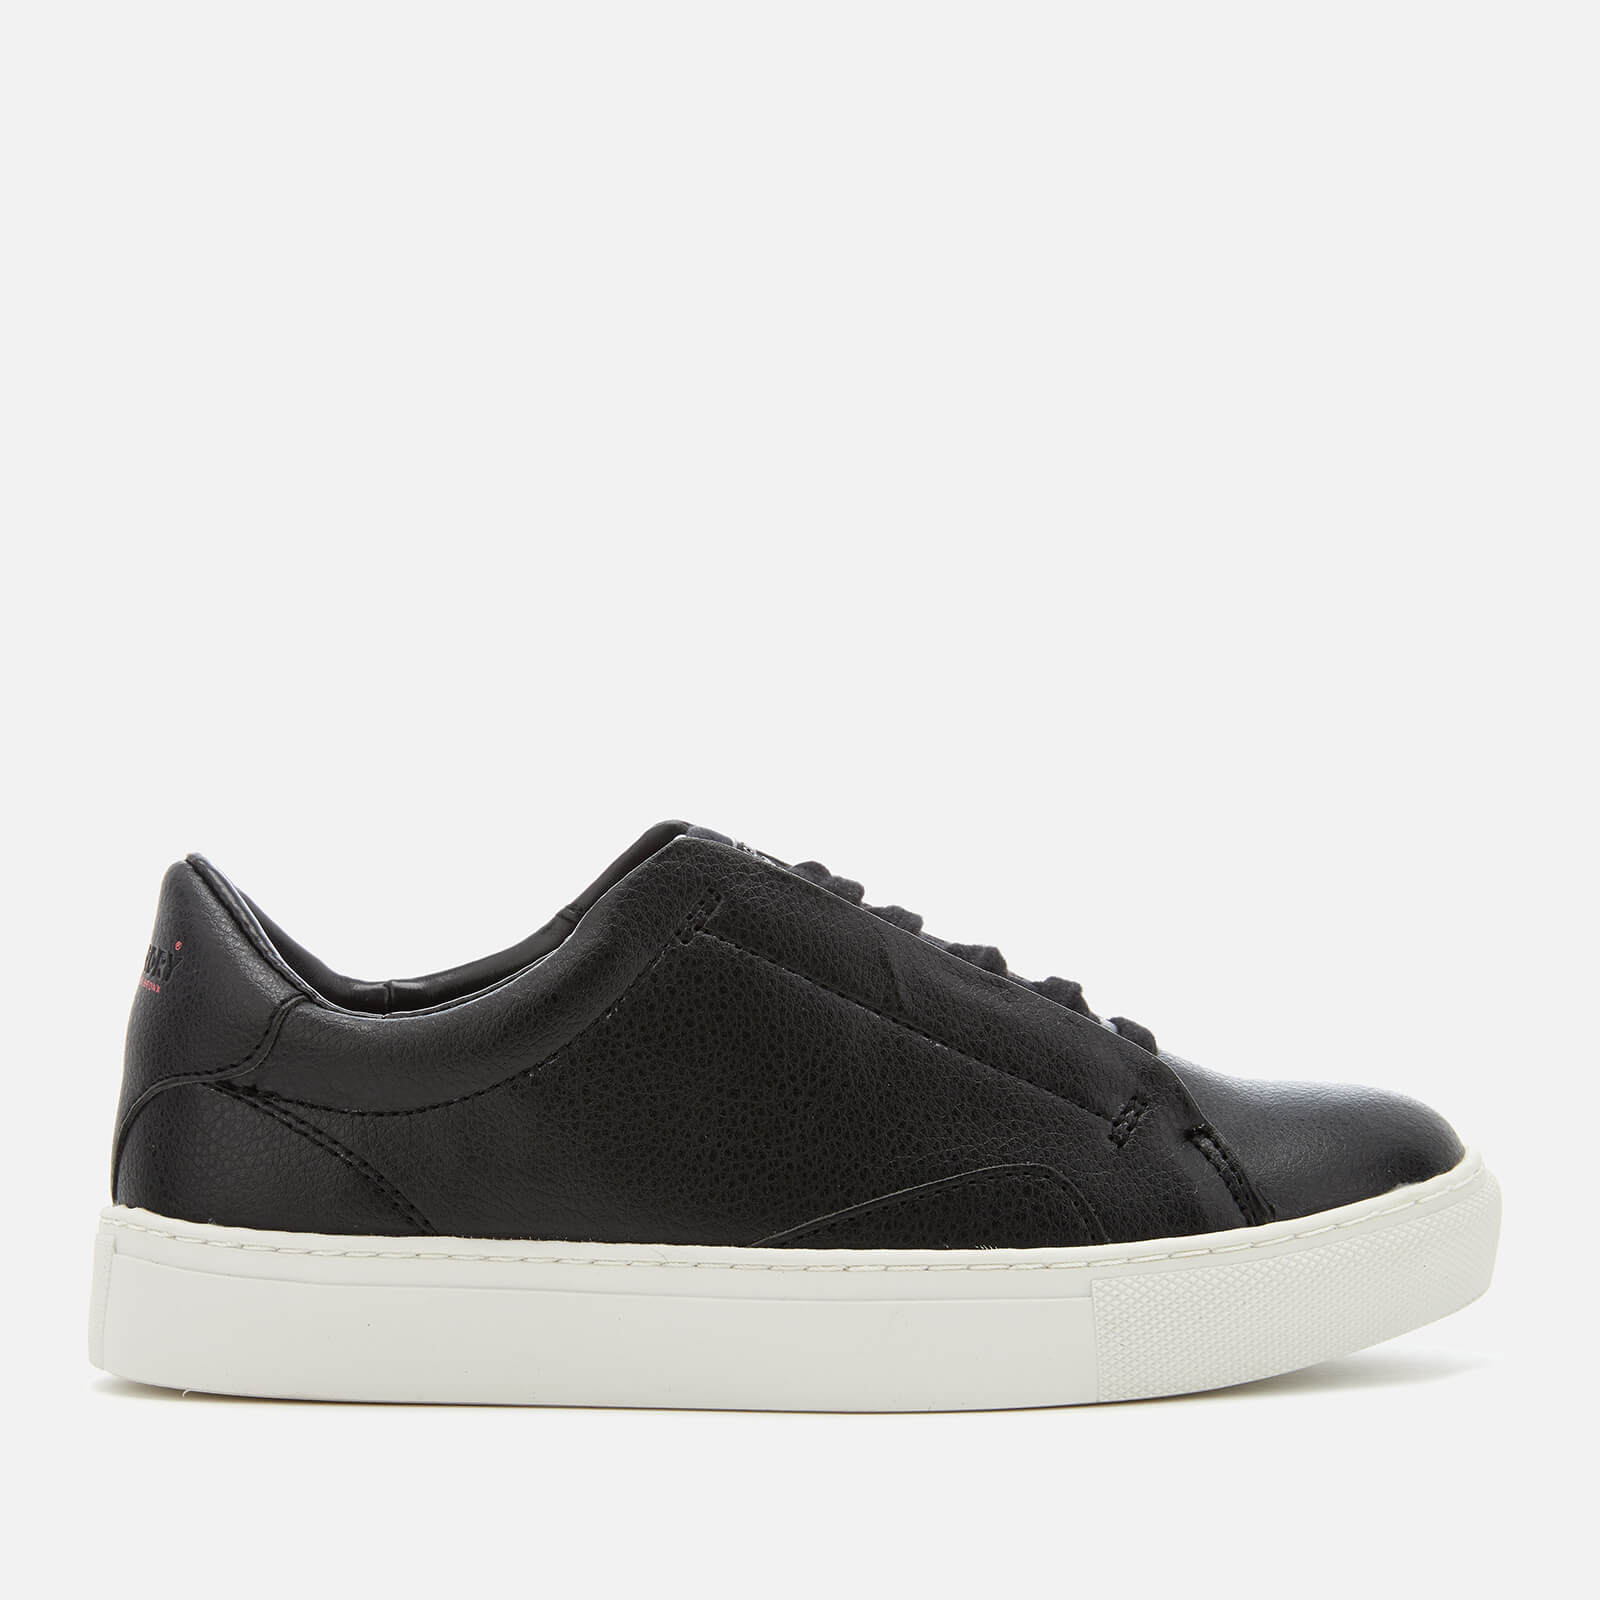 superdry black trainers